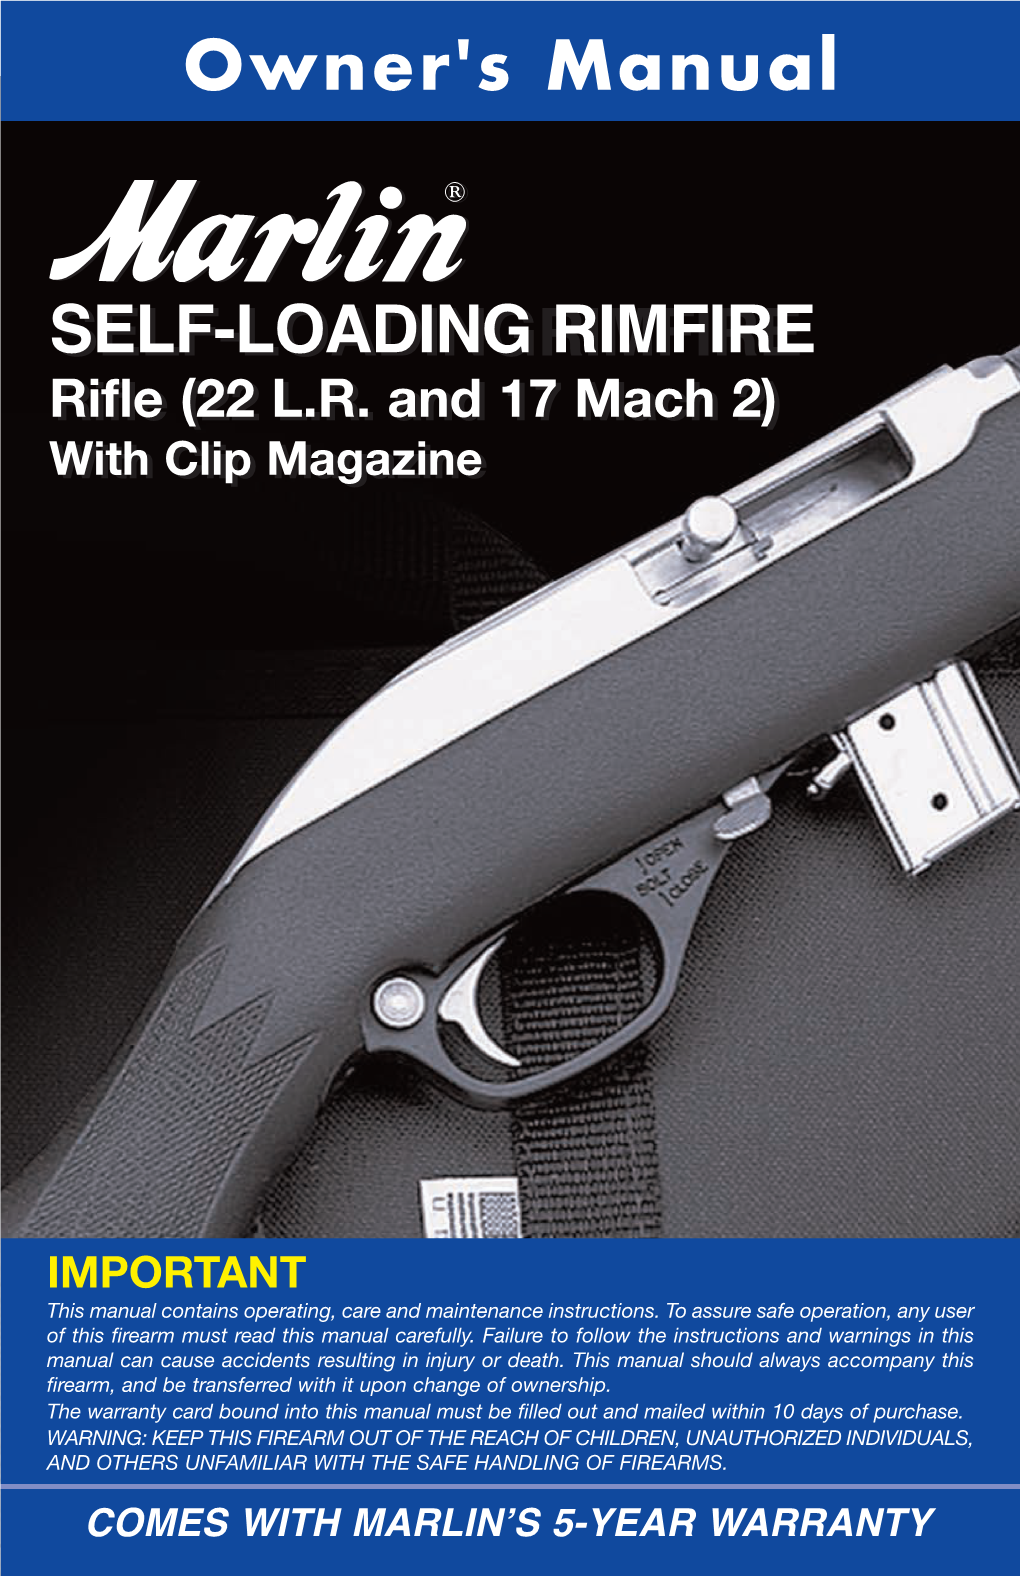 Self-Loading Rifle (22LR & 17 Mach 2) with Clip